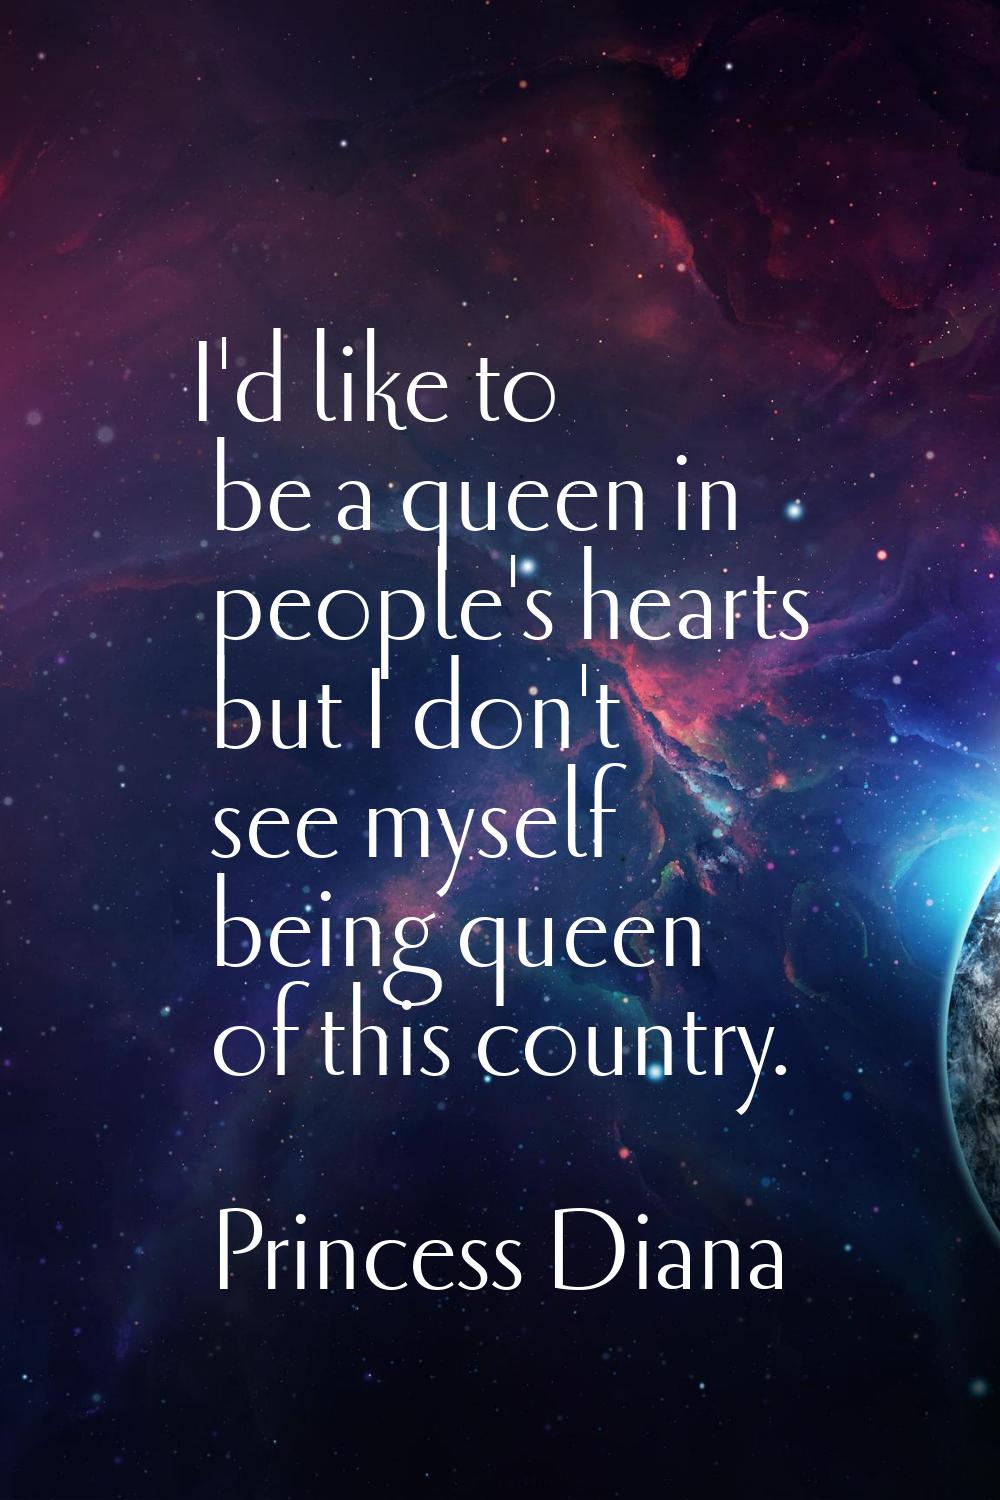 I'd like to be a queen in people's hearts but I don't see myself being queen of this country.